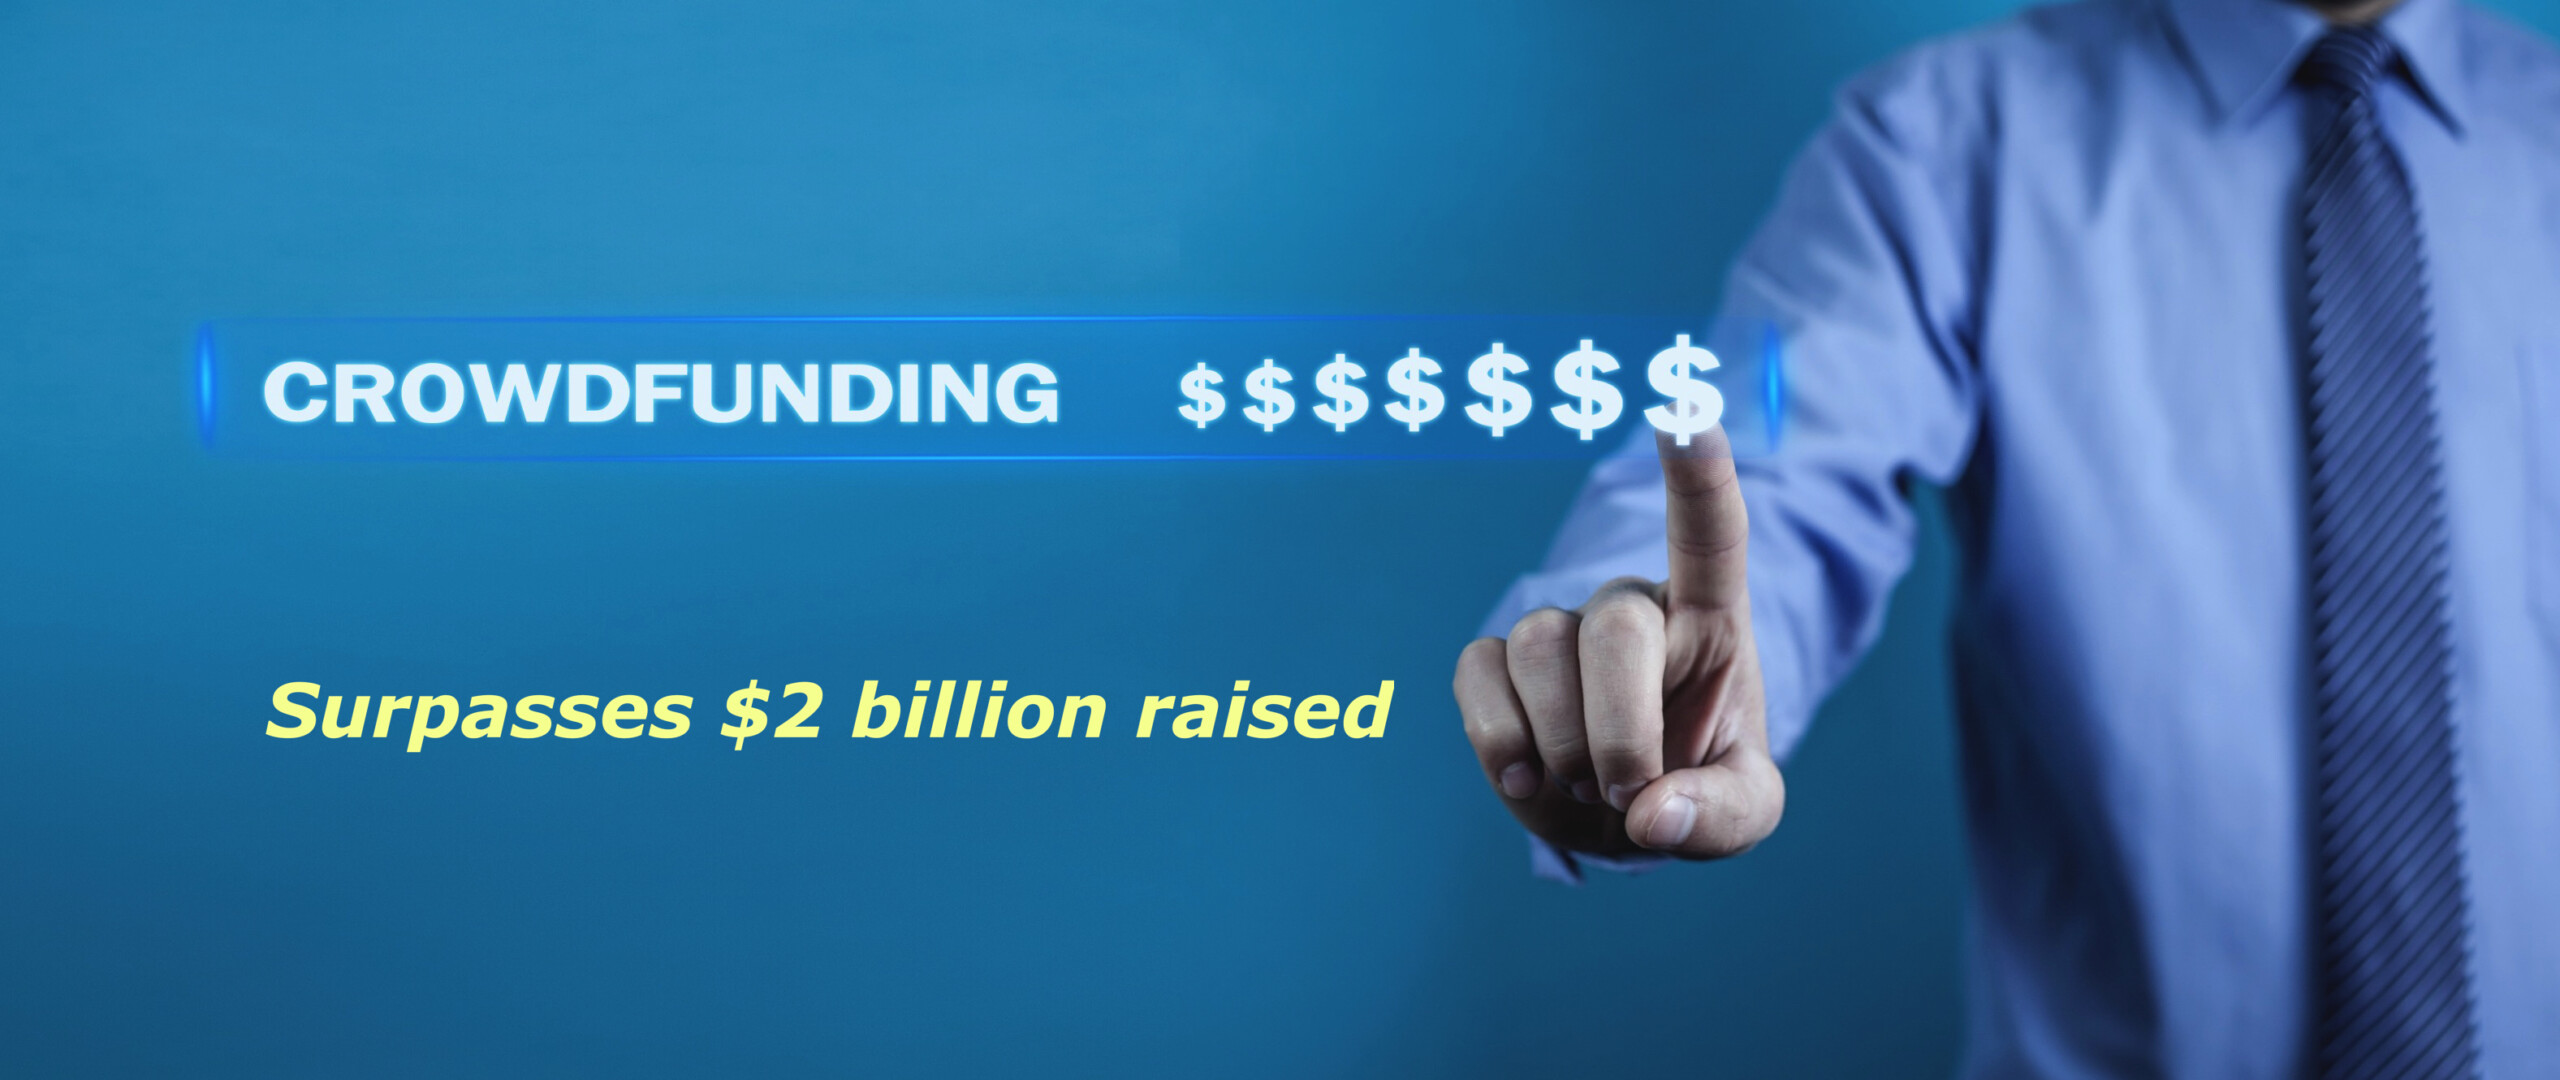 Crowdfunding investments surpass $2 billion raised by over 6,400 companies across the USA – DIH